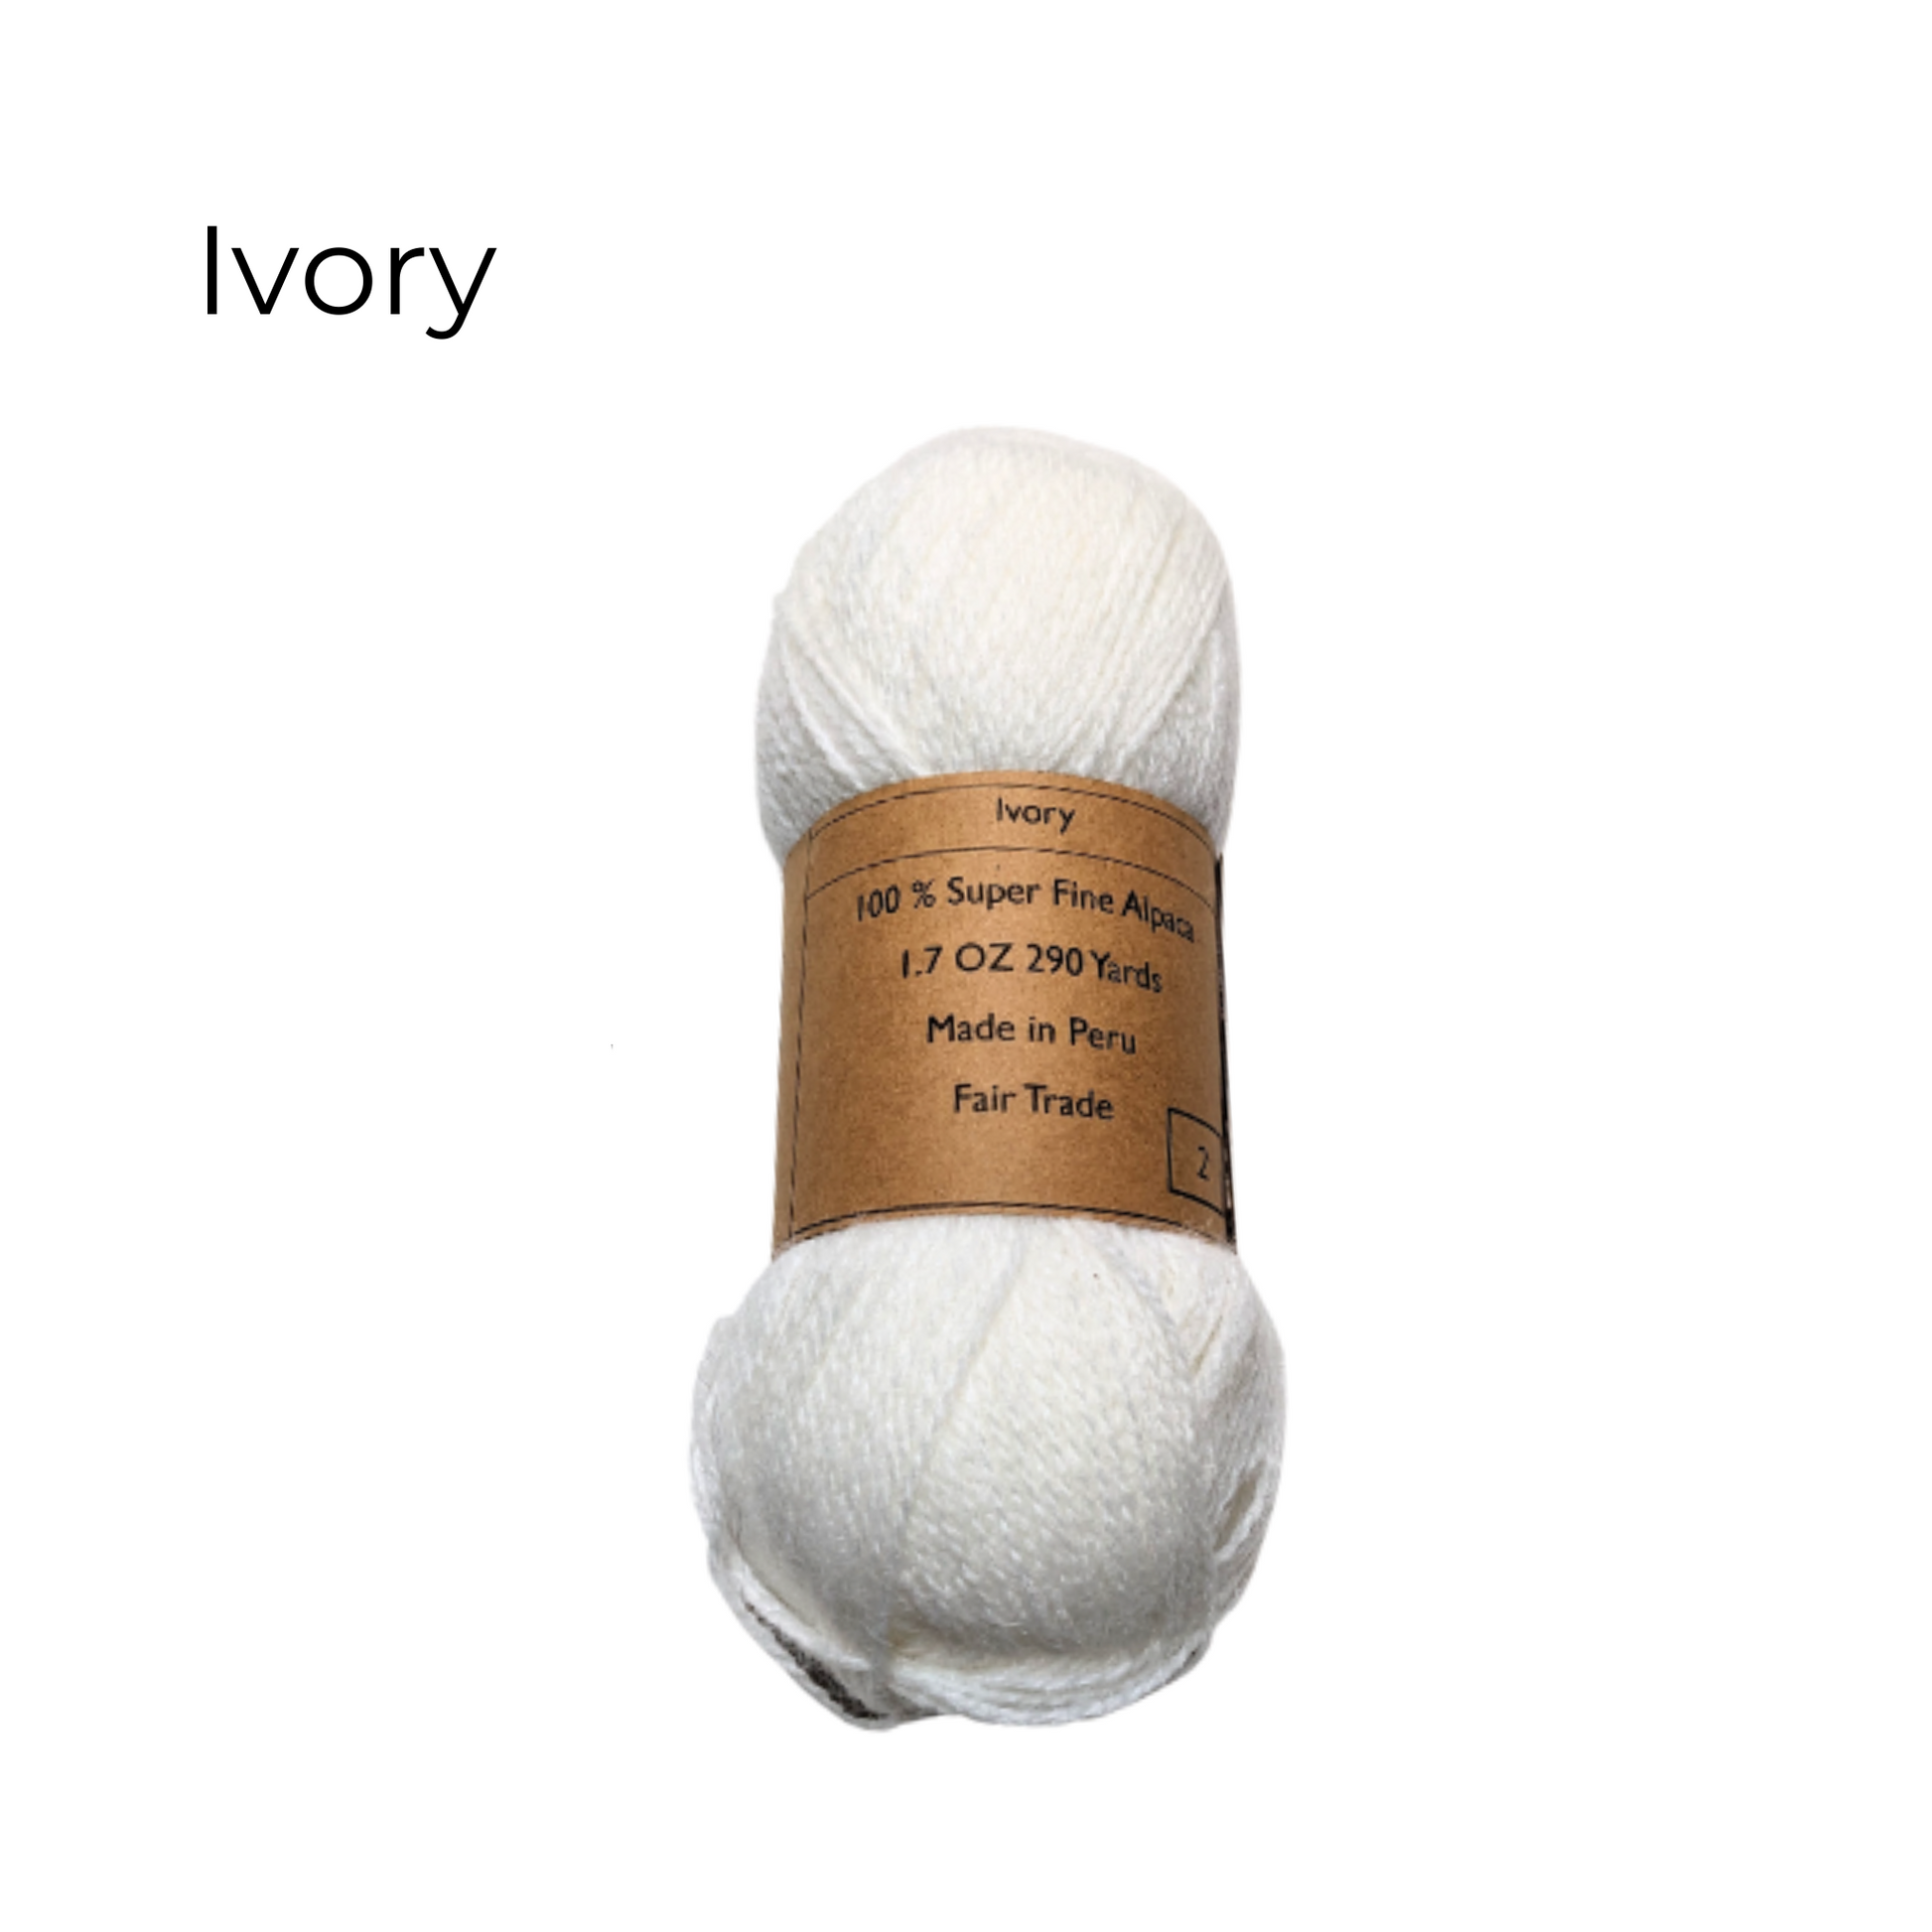 100% Baby Alpaca Yarn Wool Set of 3 Skeins Dk Weight - Made in Peru - Heavenly Soft and Perfect for Knitting and Crocheting (Heather Peach, DK)